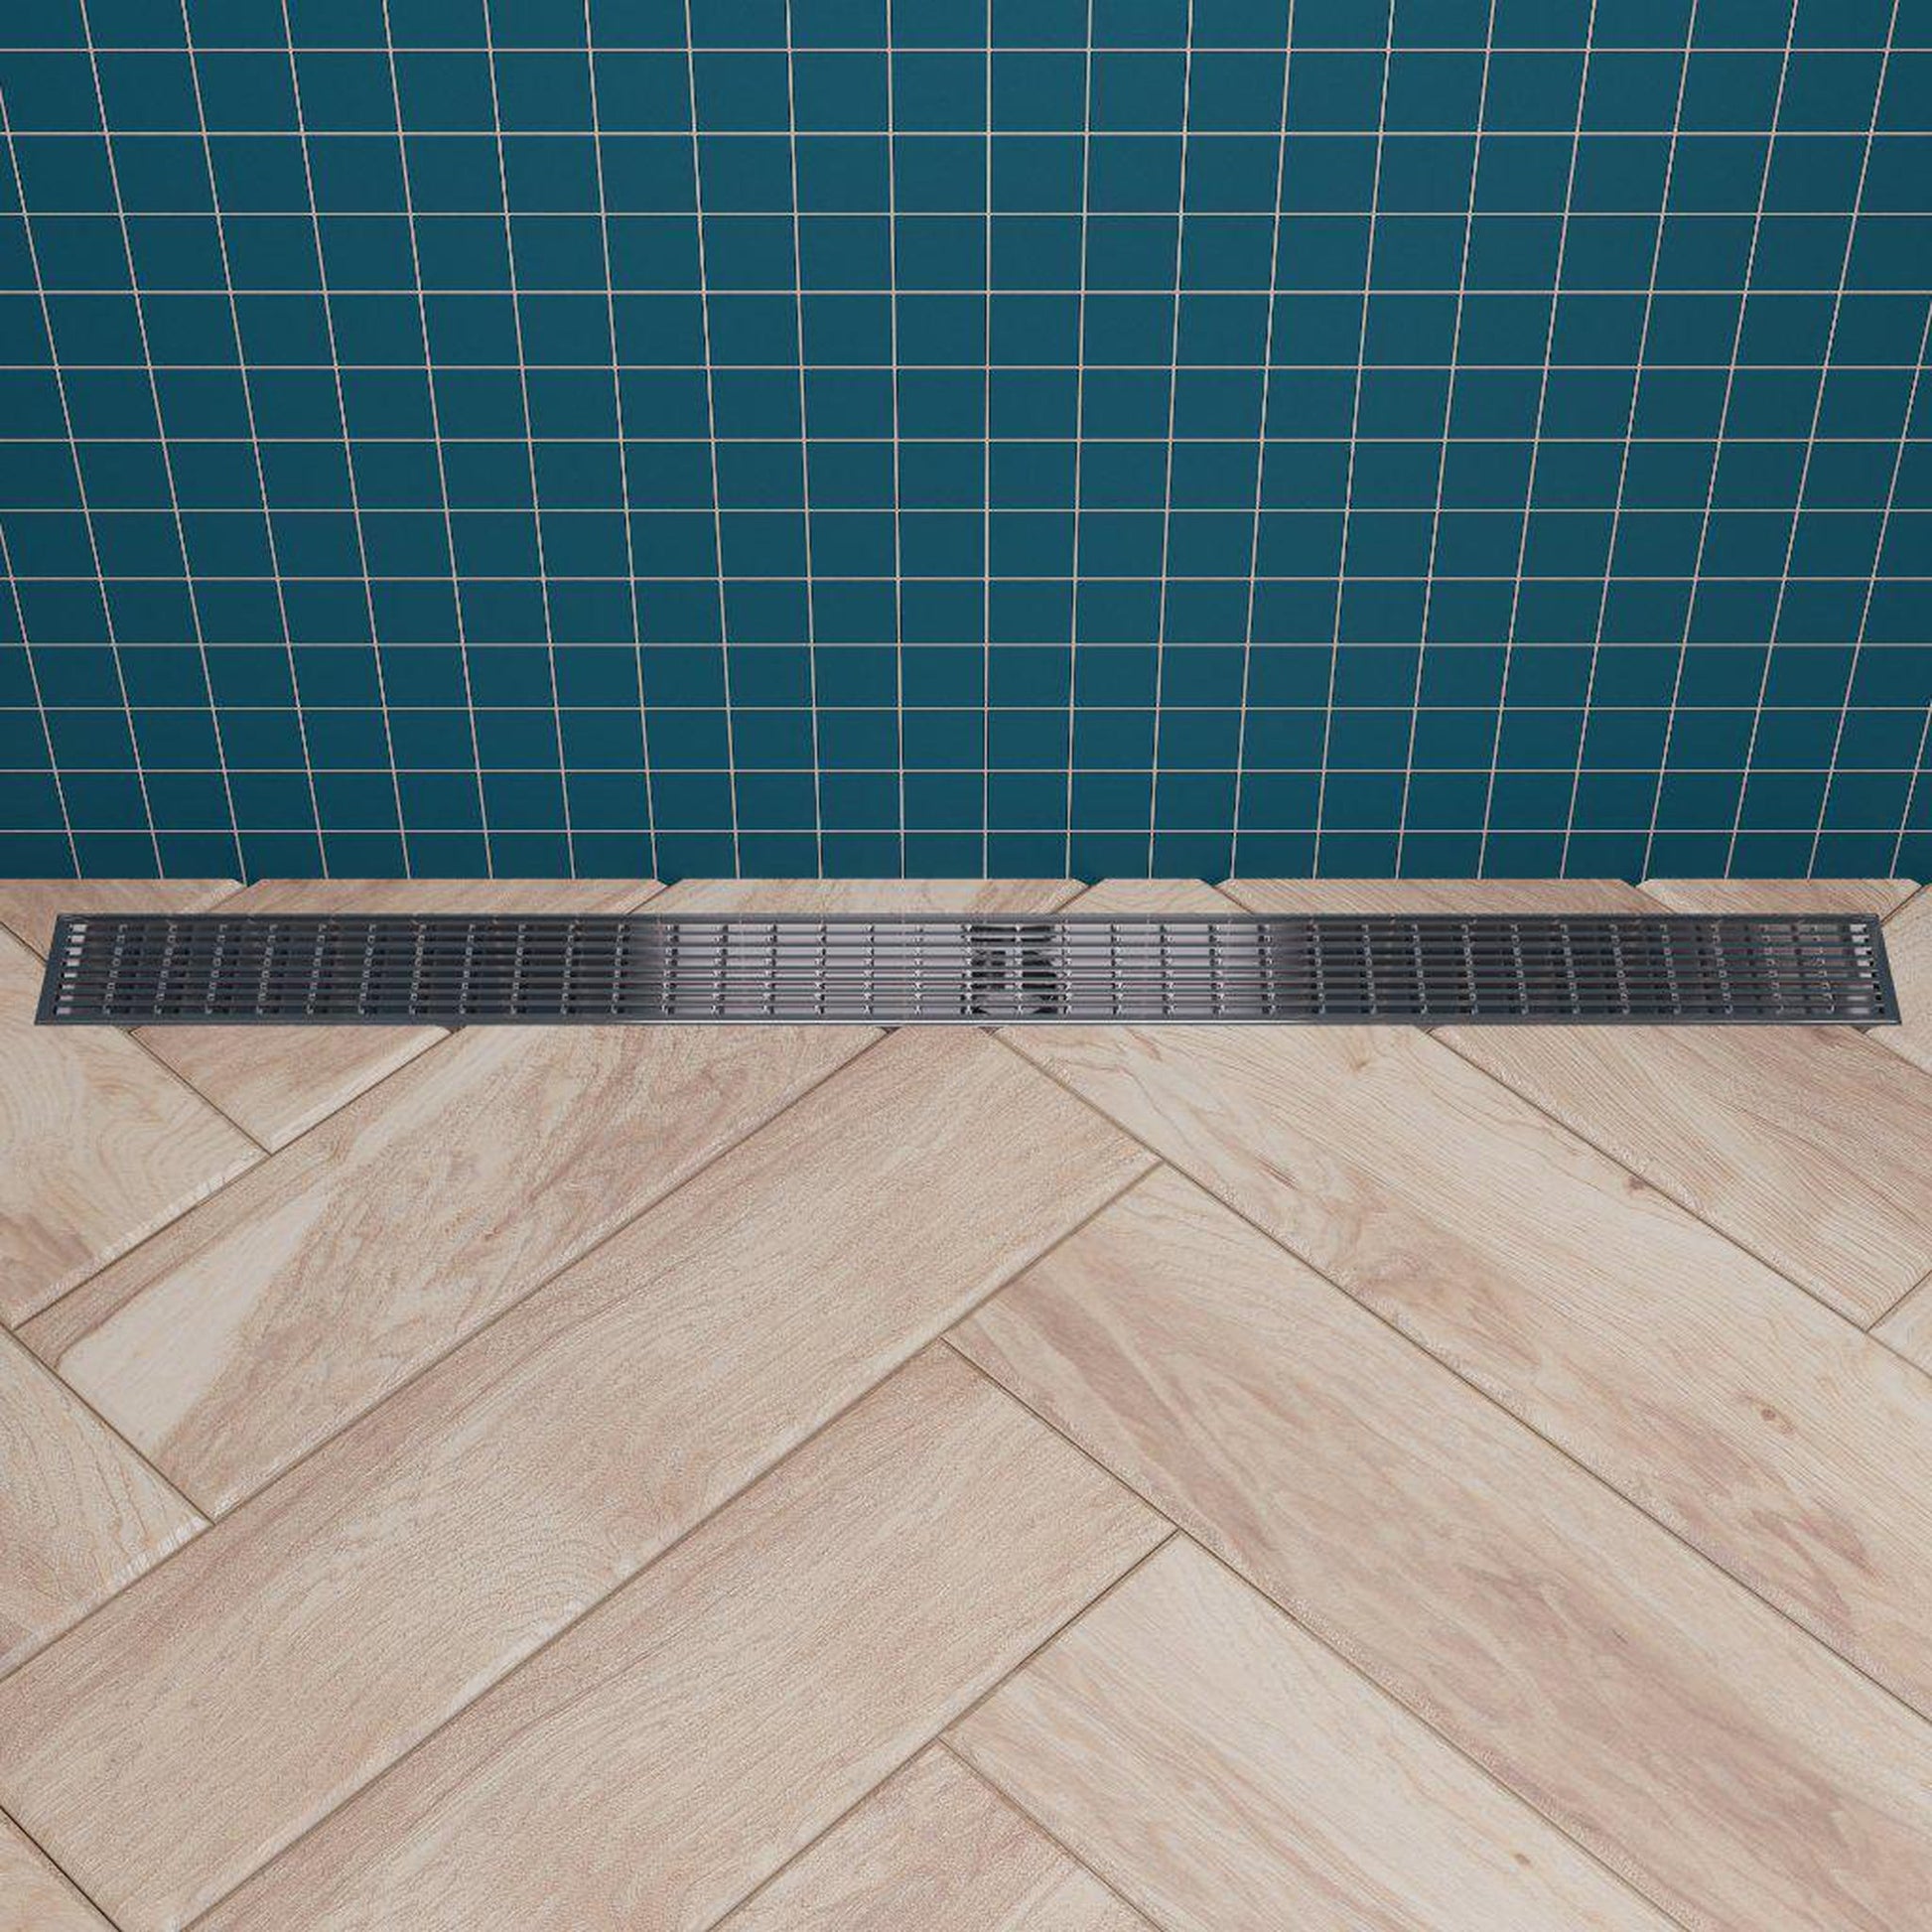 ALFI Brand ABLD36D 36" Brushed Stainless Steel Rectangle Linear Shower Drain With Groove Lines